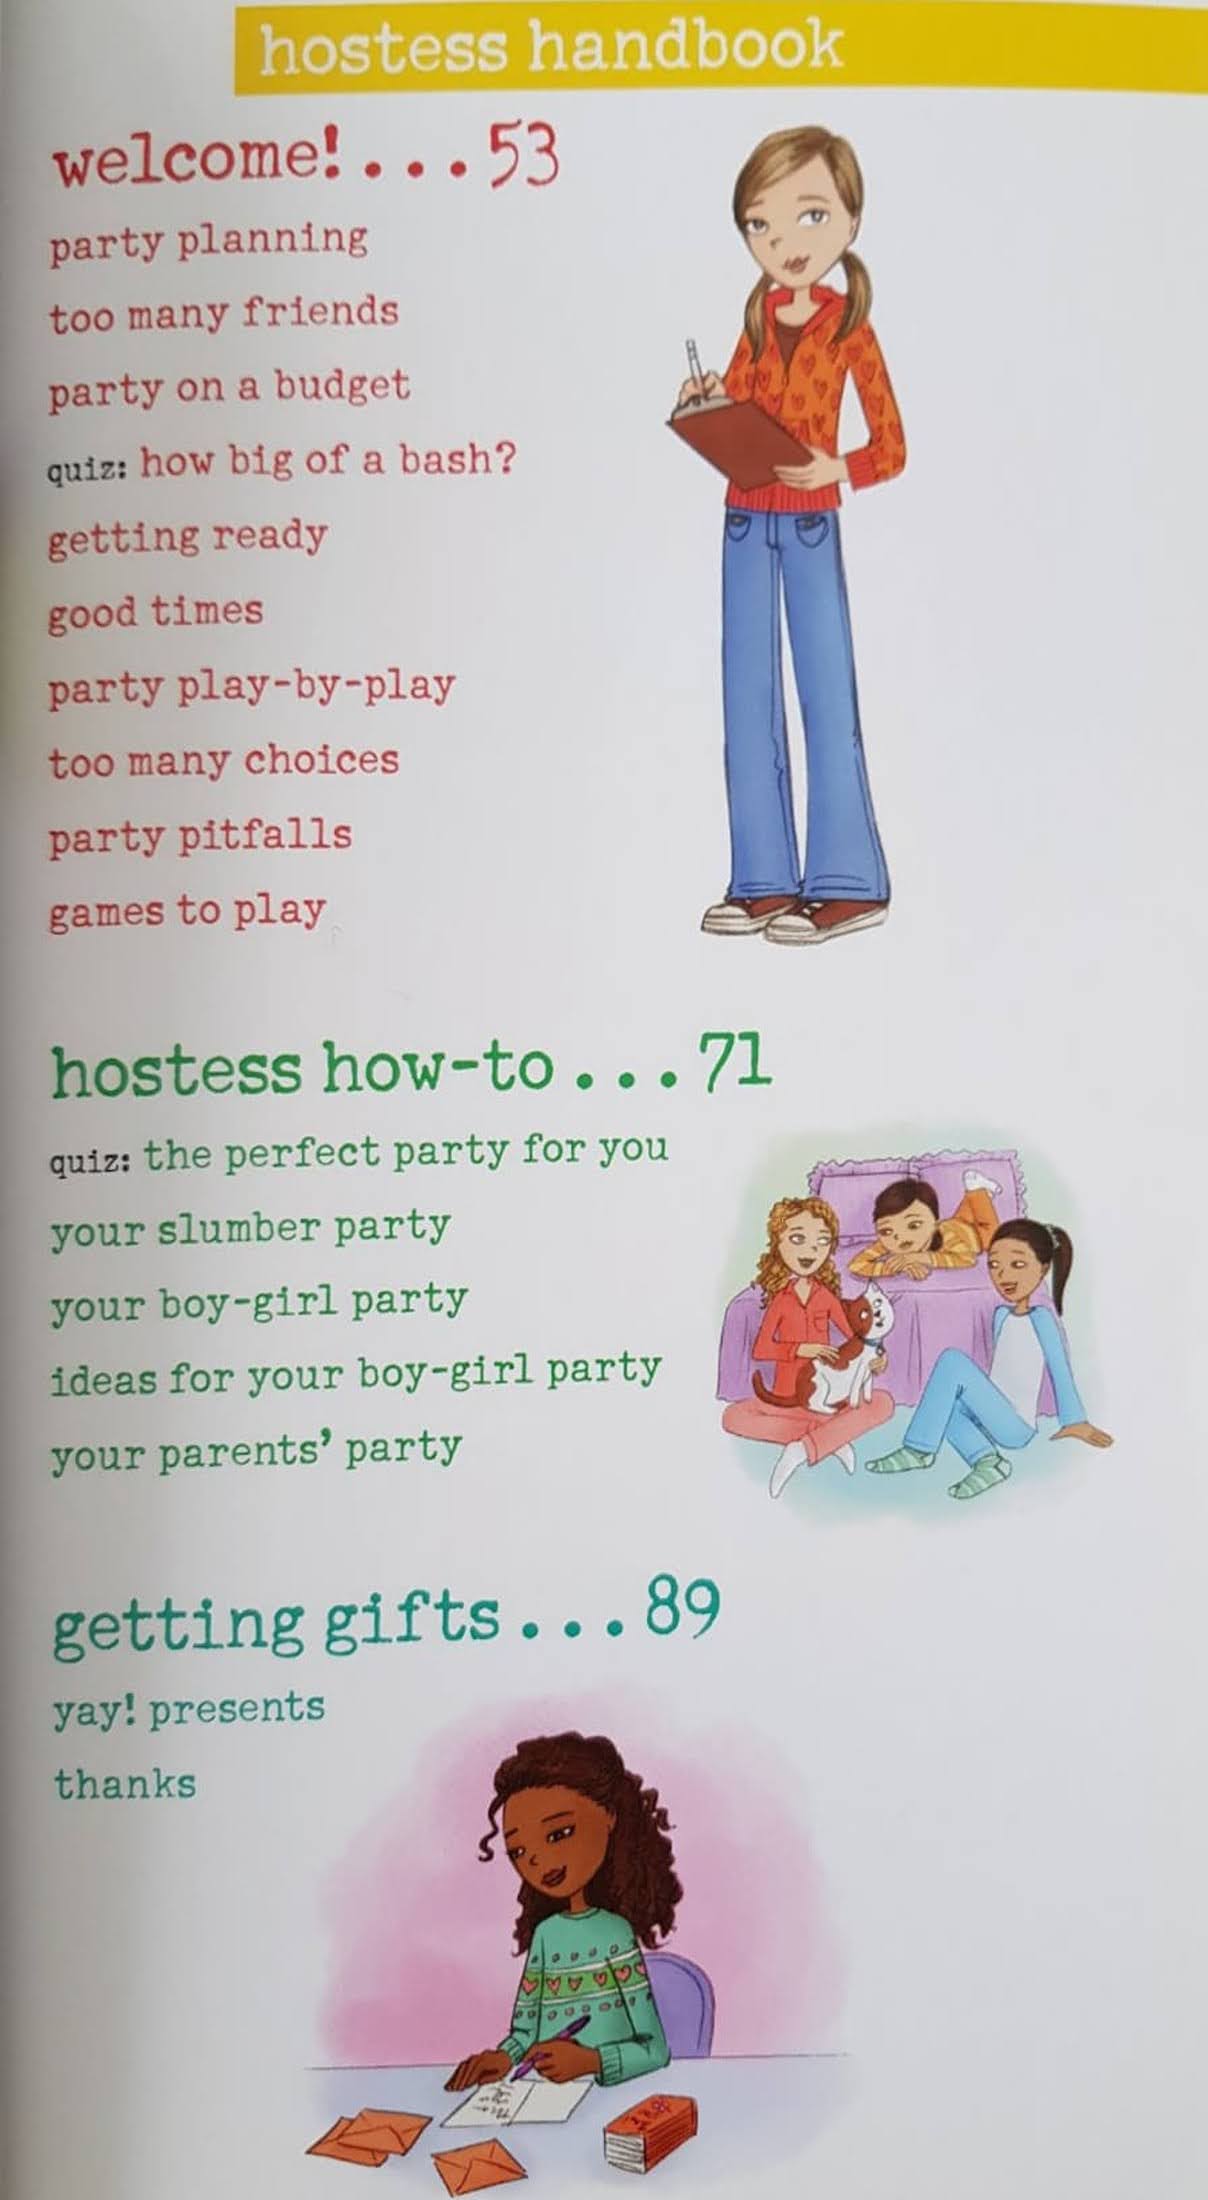 A SMART GIRL'S GUIDE TO PARTIES Like New American Girl  (6261481013433)